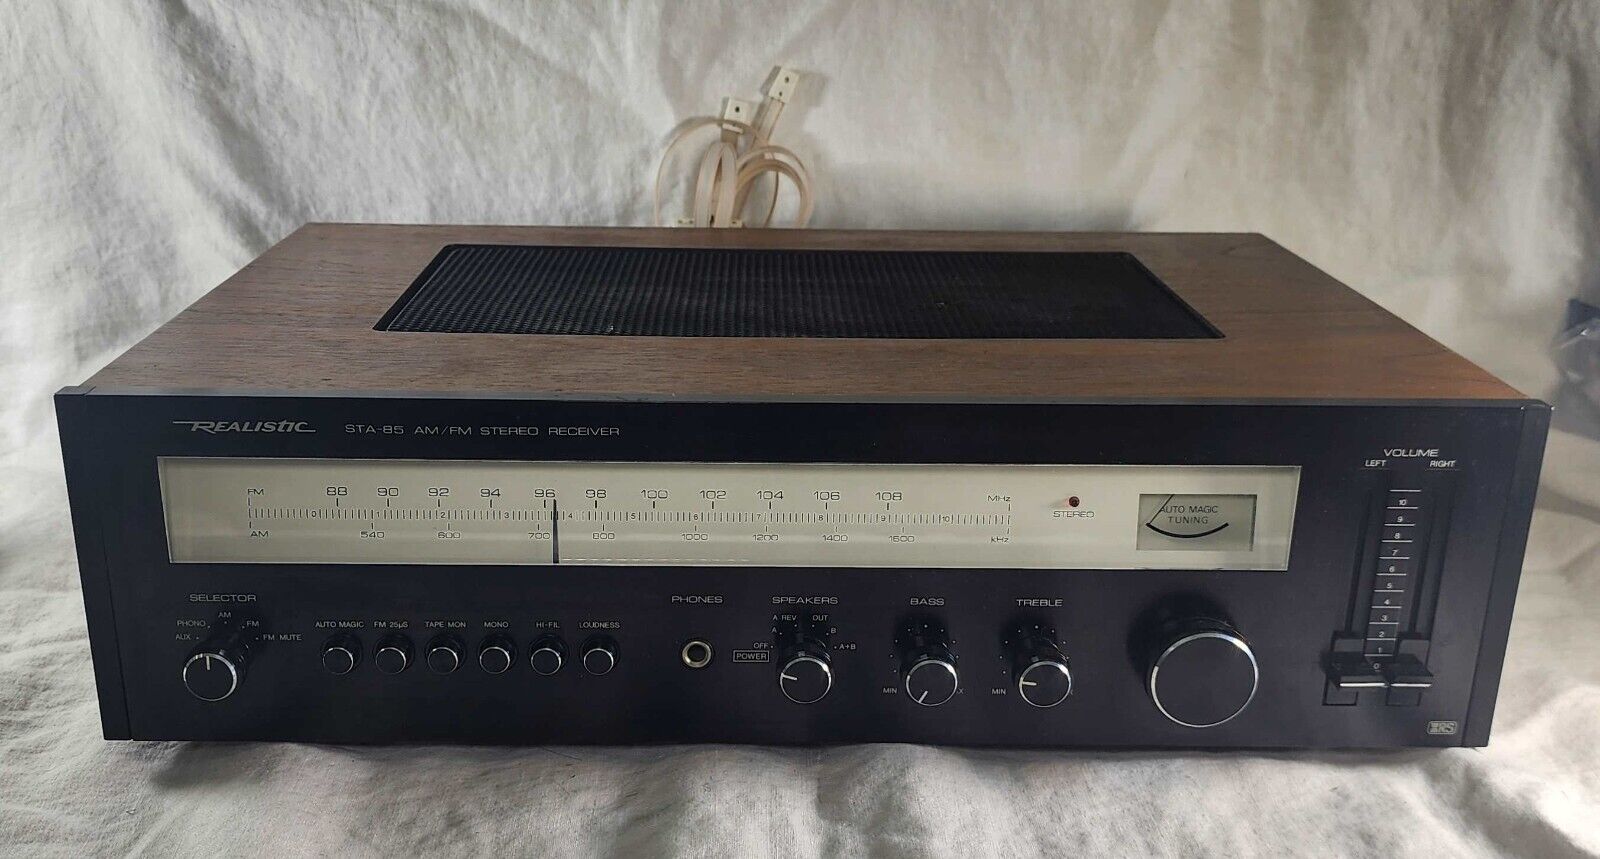 Vintage Realistic STA-85 AM/FM Stereo Receiver Model #31-2061 1979 Model Wood